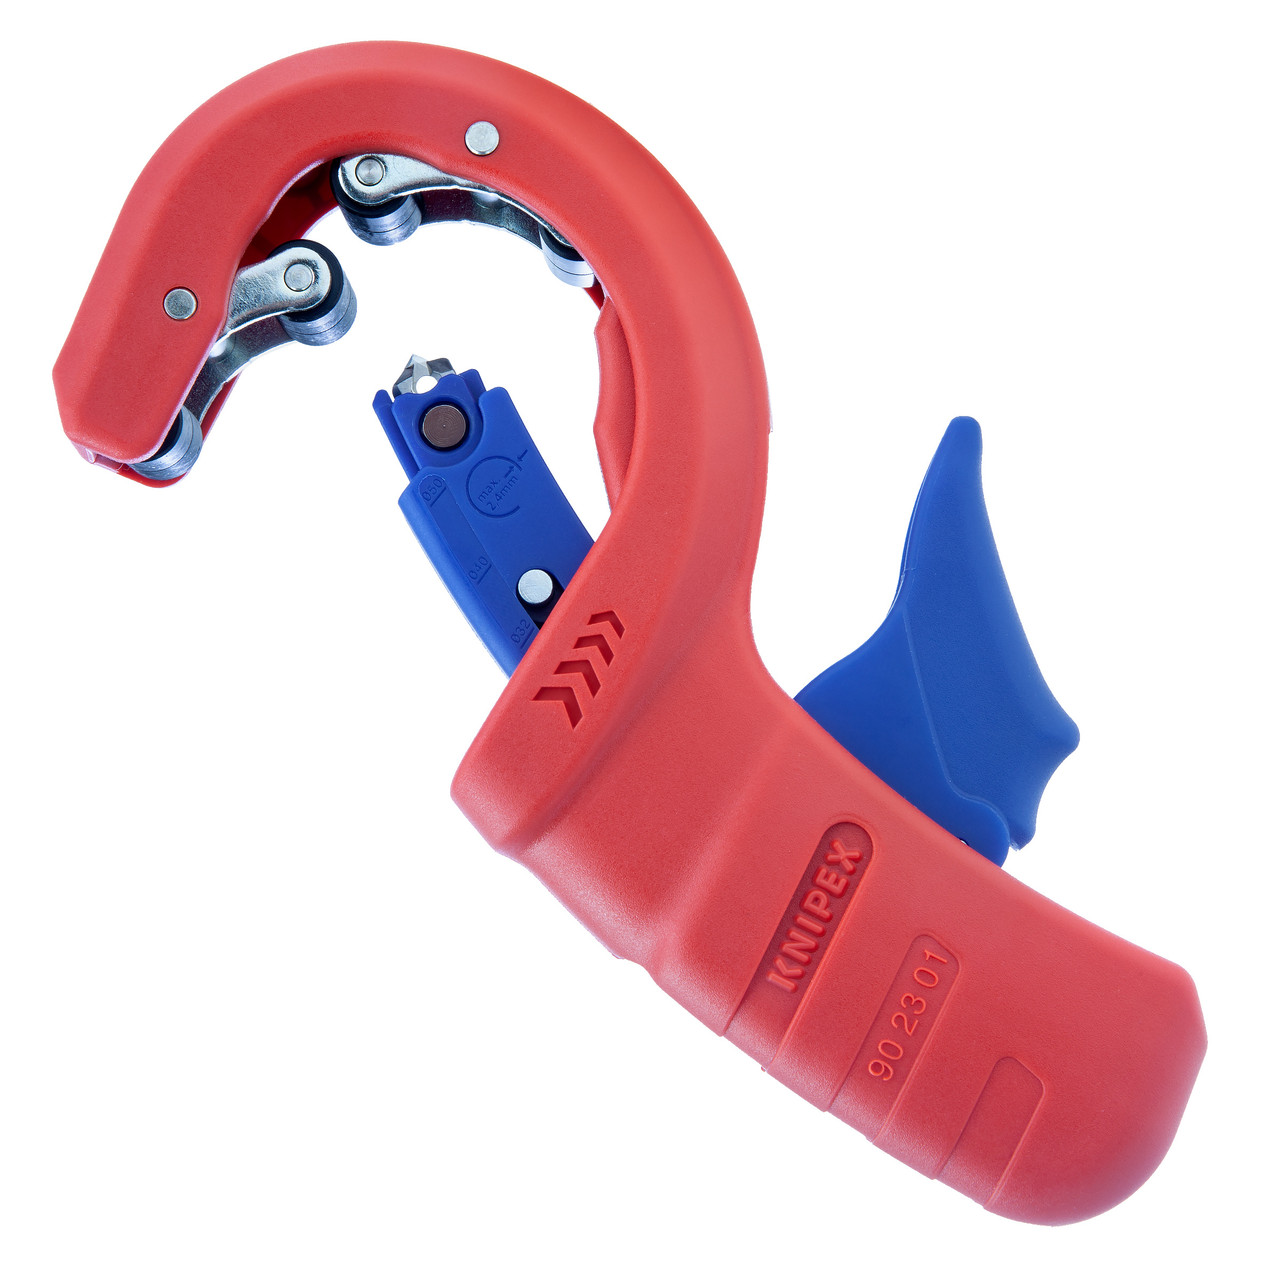 Photos - Pipe Cutter KNIPEX 902301BK DP50 Cutter for Plastic Drain Pipes 